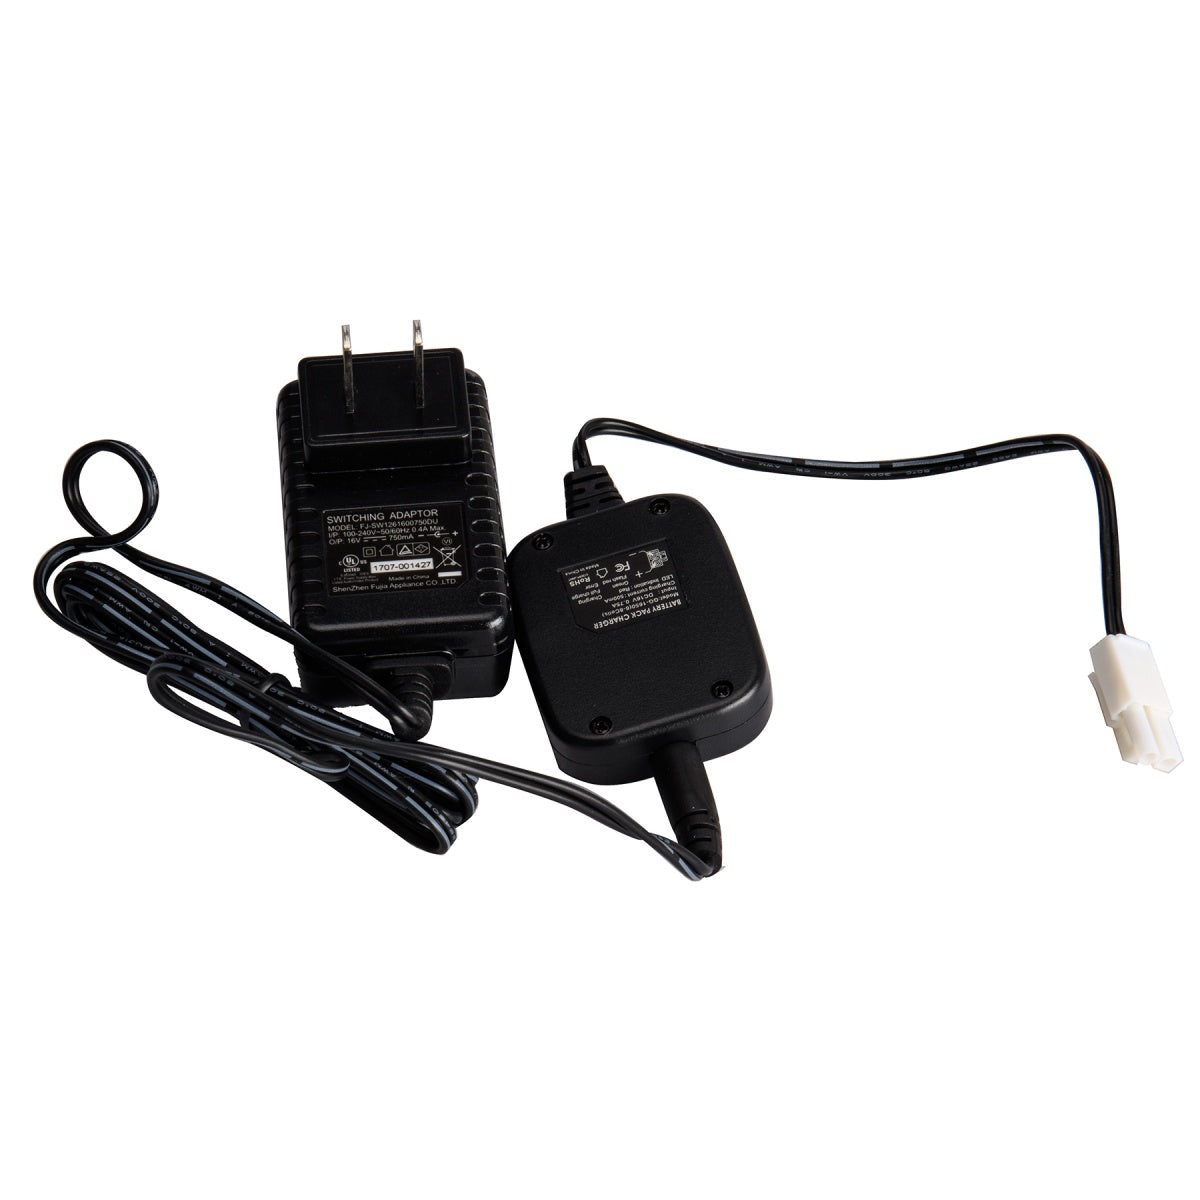 G&G ARMAMENT 16V 0.4A NIMH BATTERY CHARGER FOR AEG